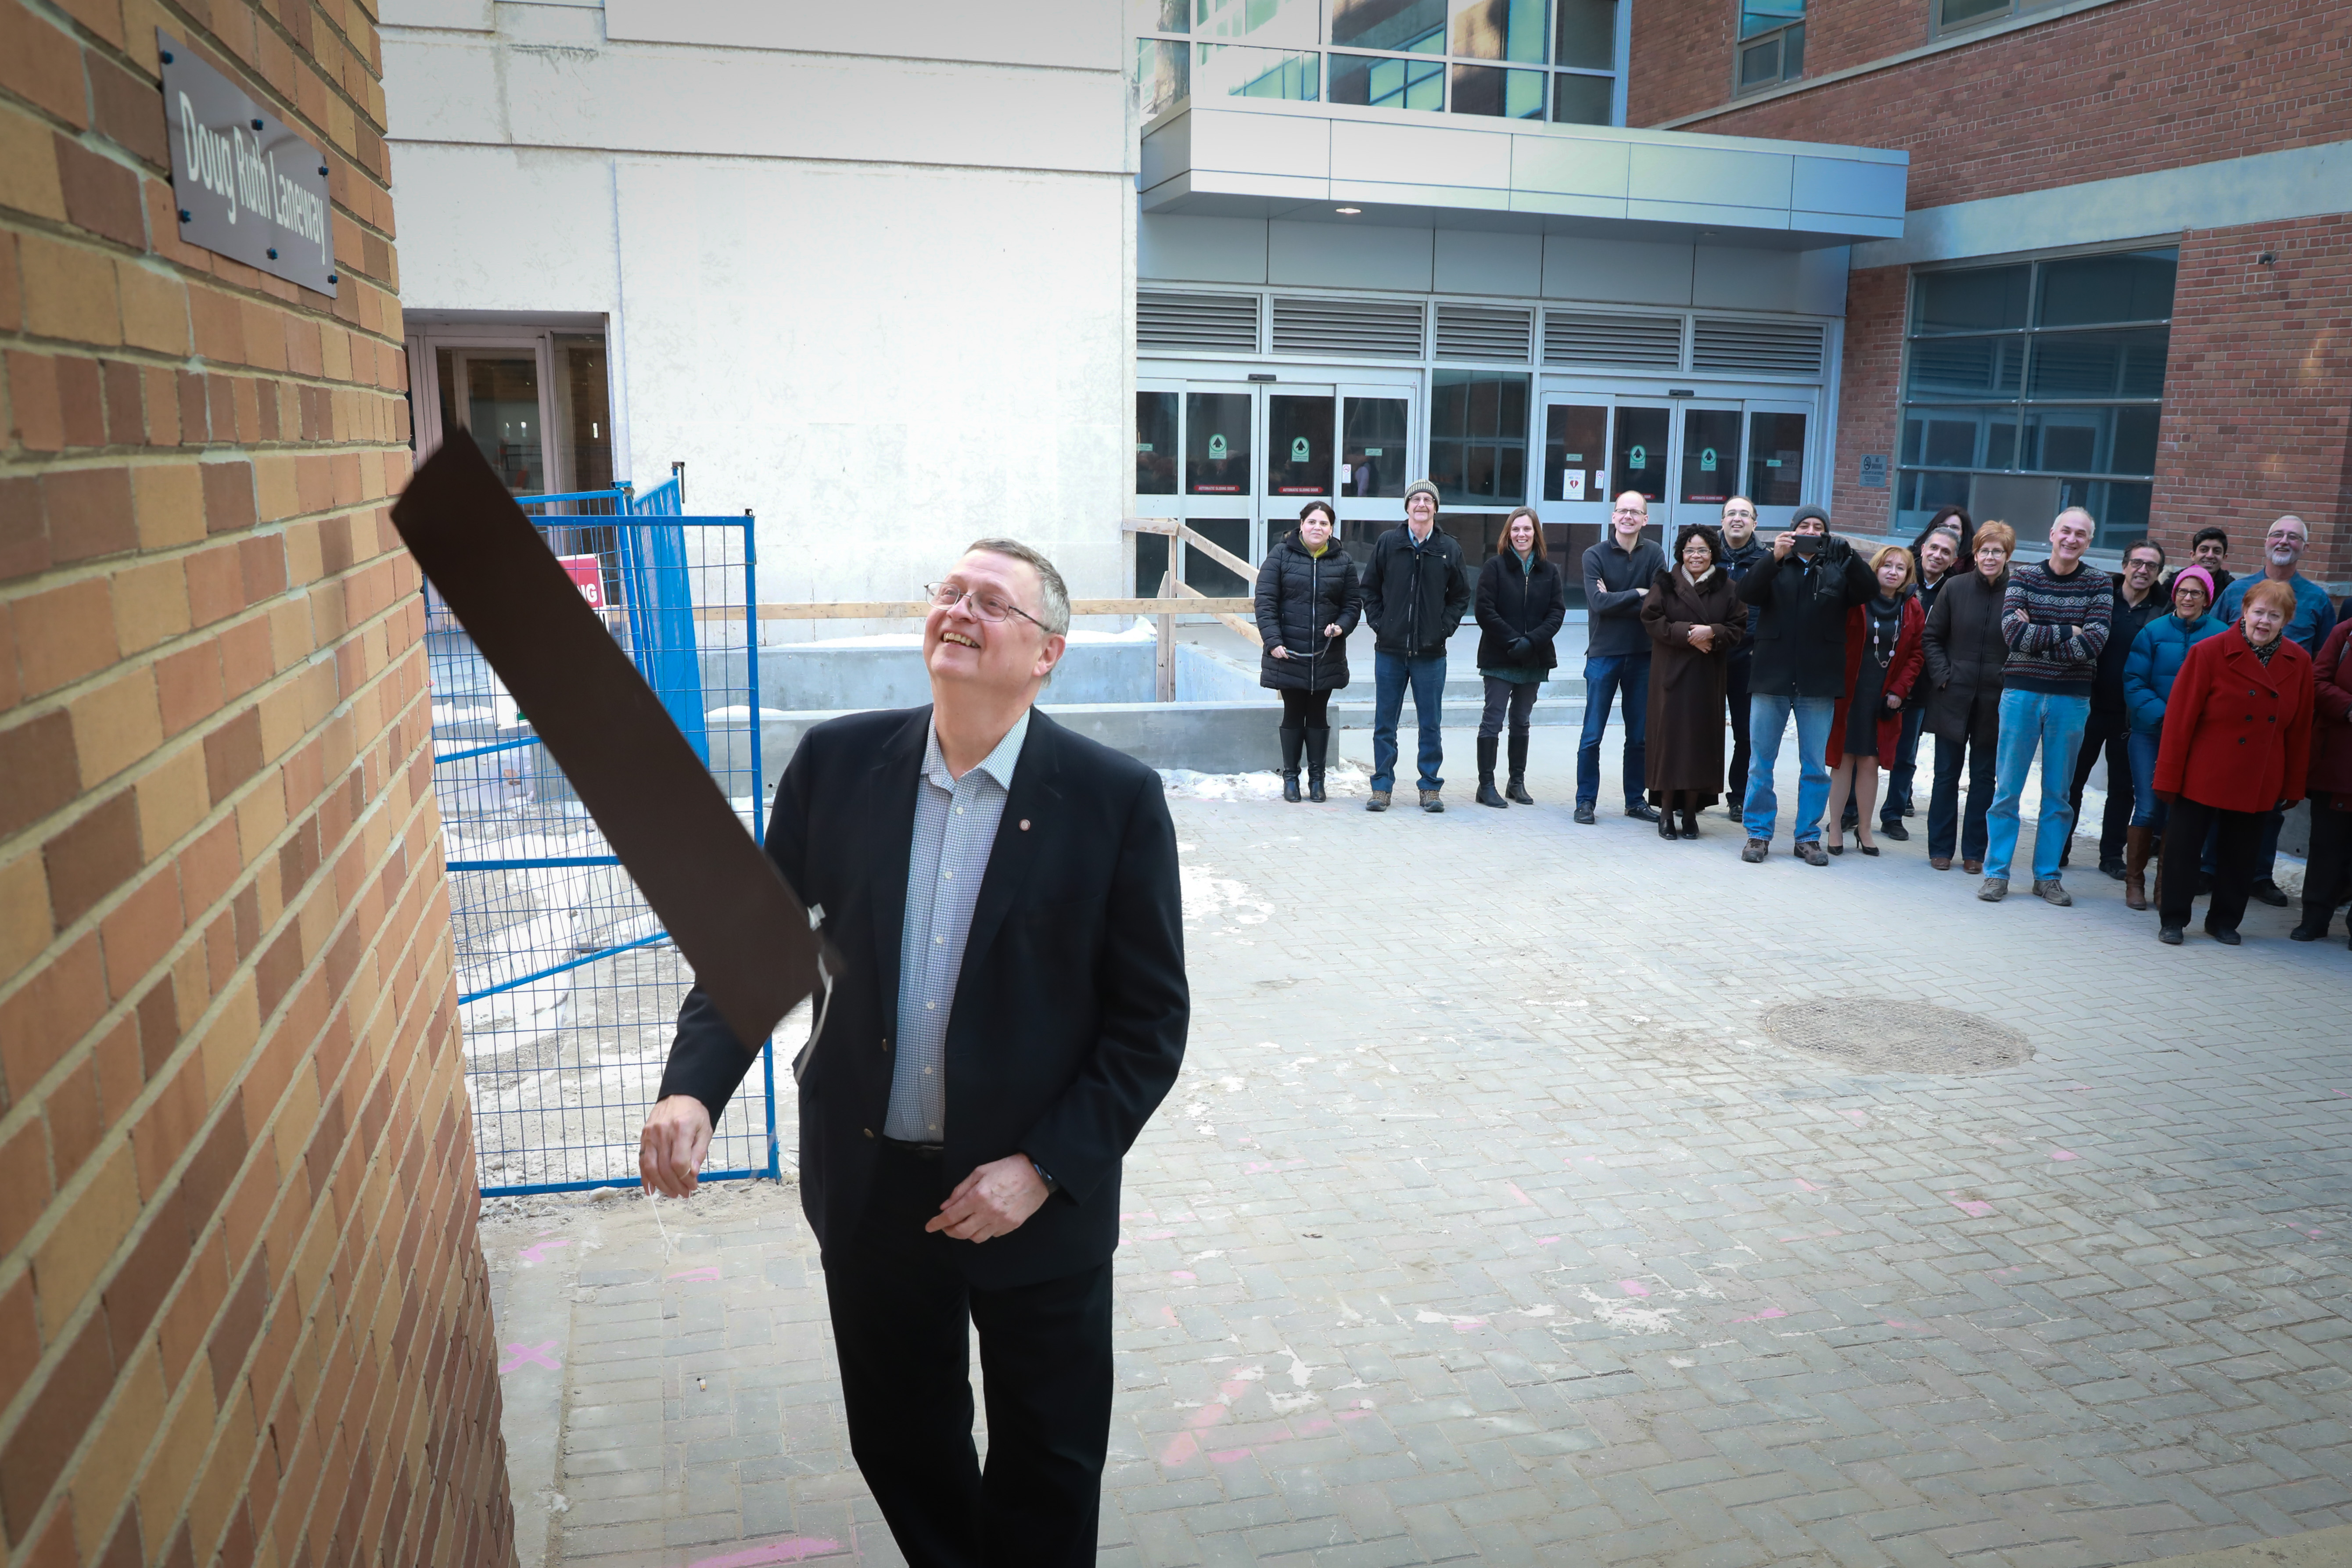 Alt: Smiling, Doug Ruth pulls off a magnetic strip from a brown sign with white letters,  reveling "Doug Ruth Laneway"